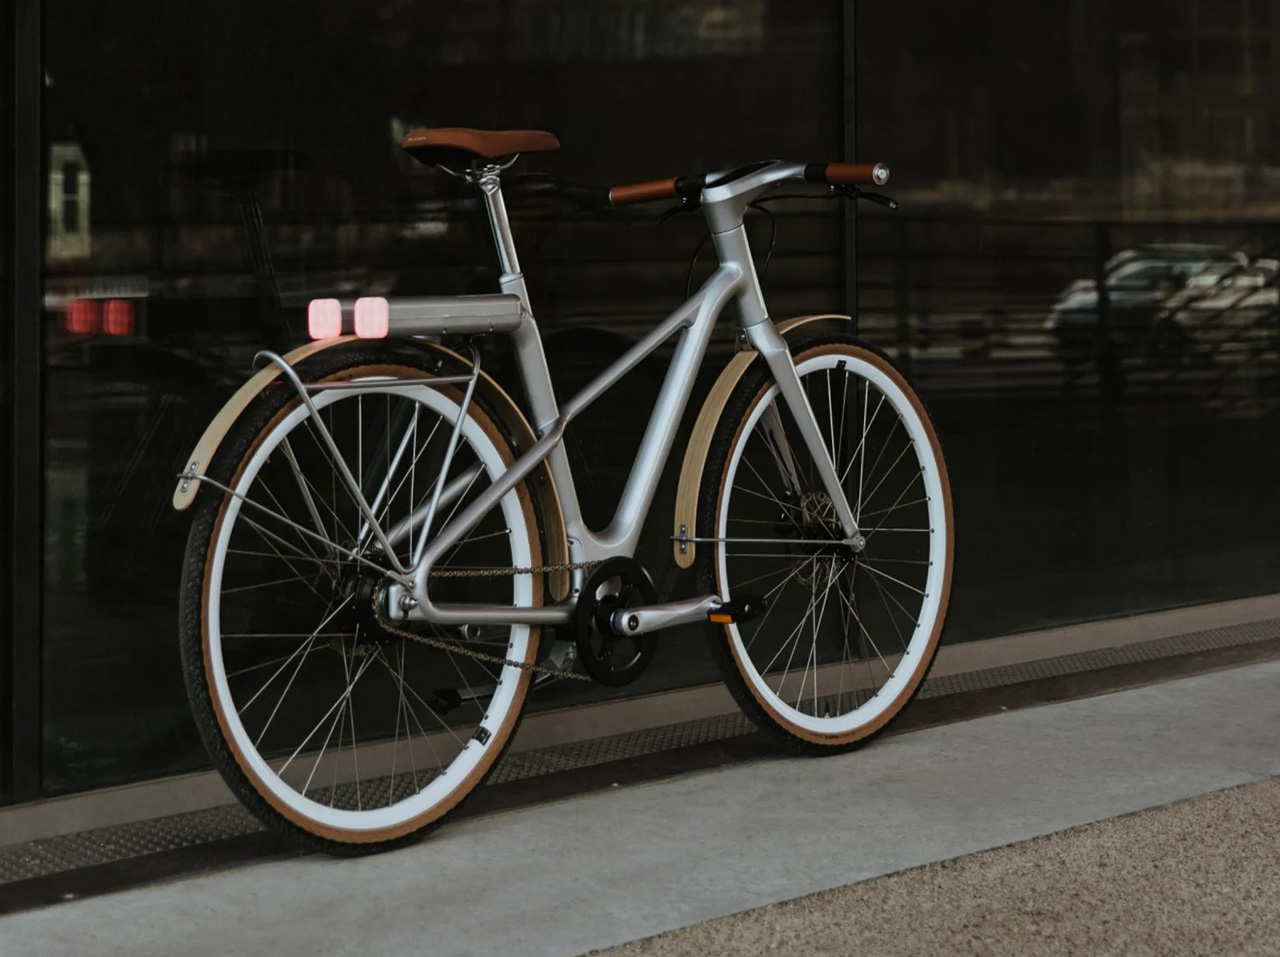 French bicycle brand Angell unveiled “one of the world’s lightest e-bikes”